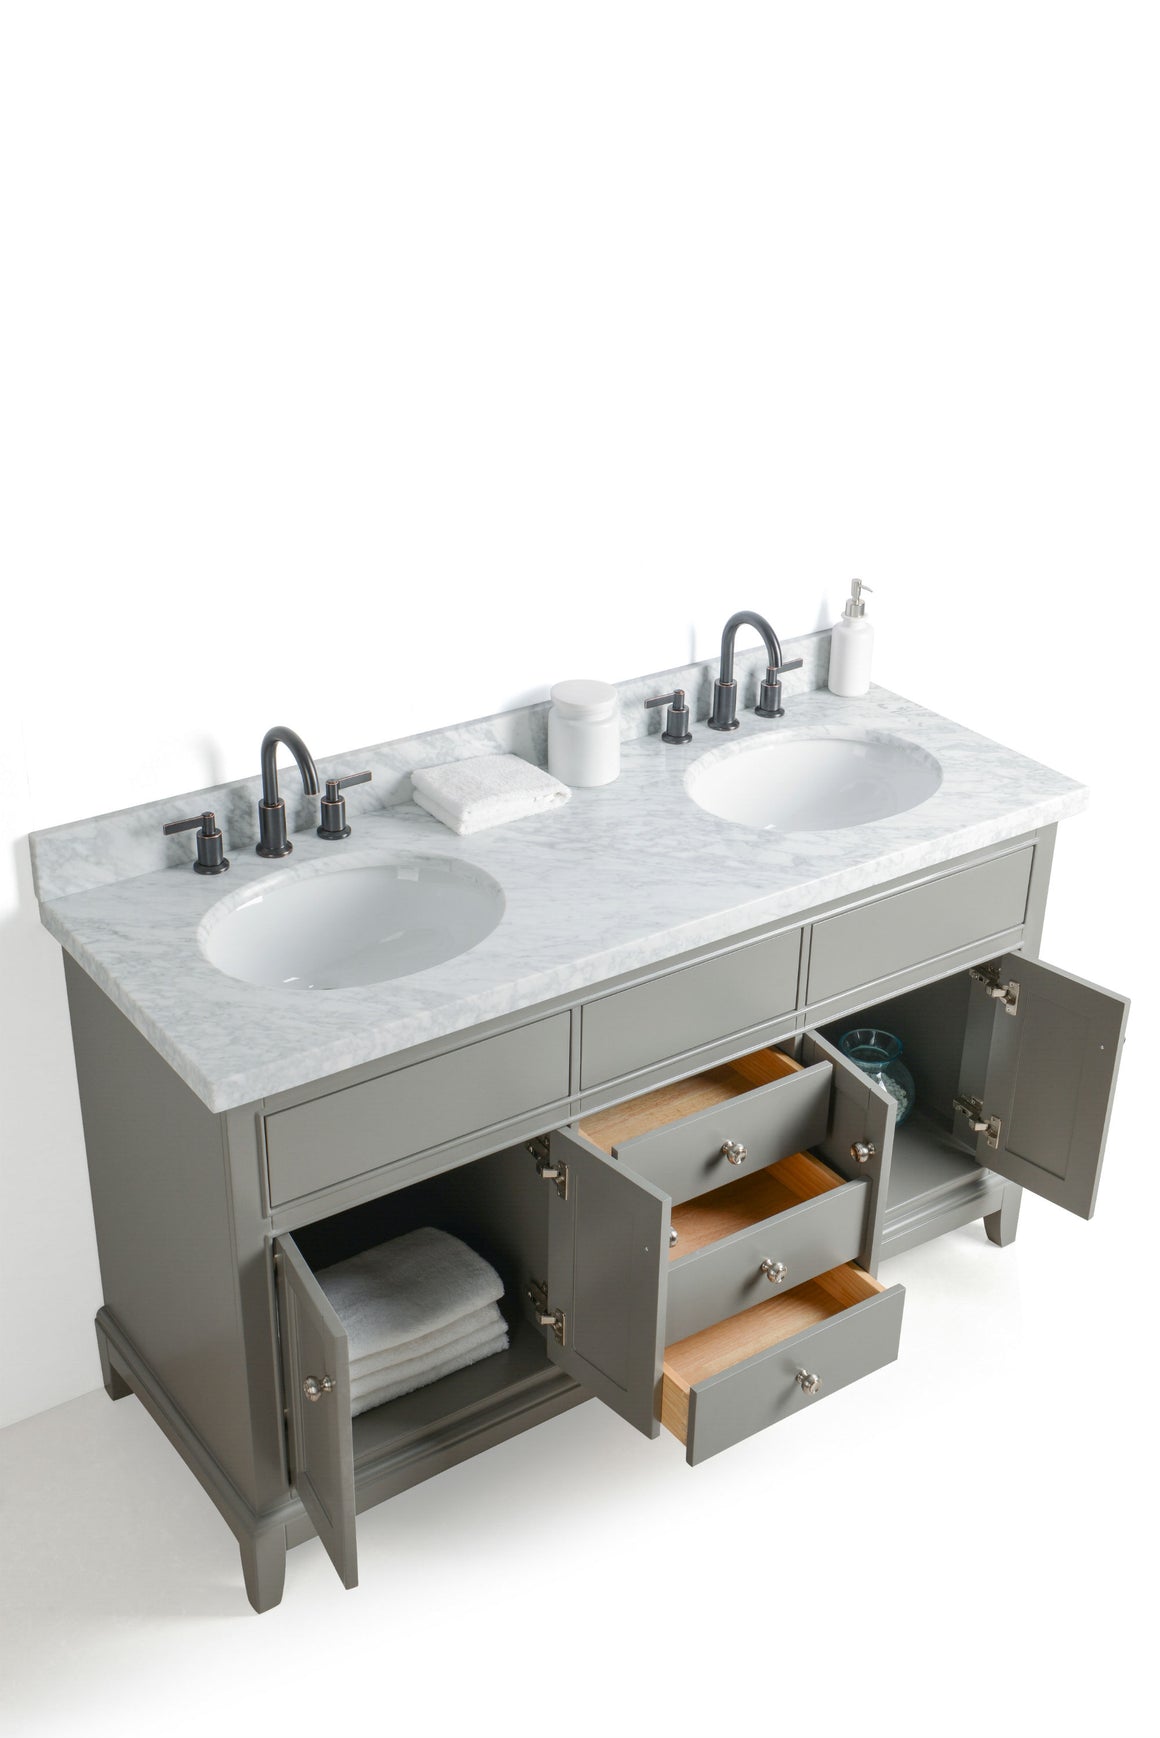 60" Grey Dual Sink Bathroom Vanity with Mirrors, Marble Top and Faucets